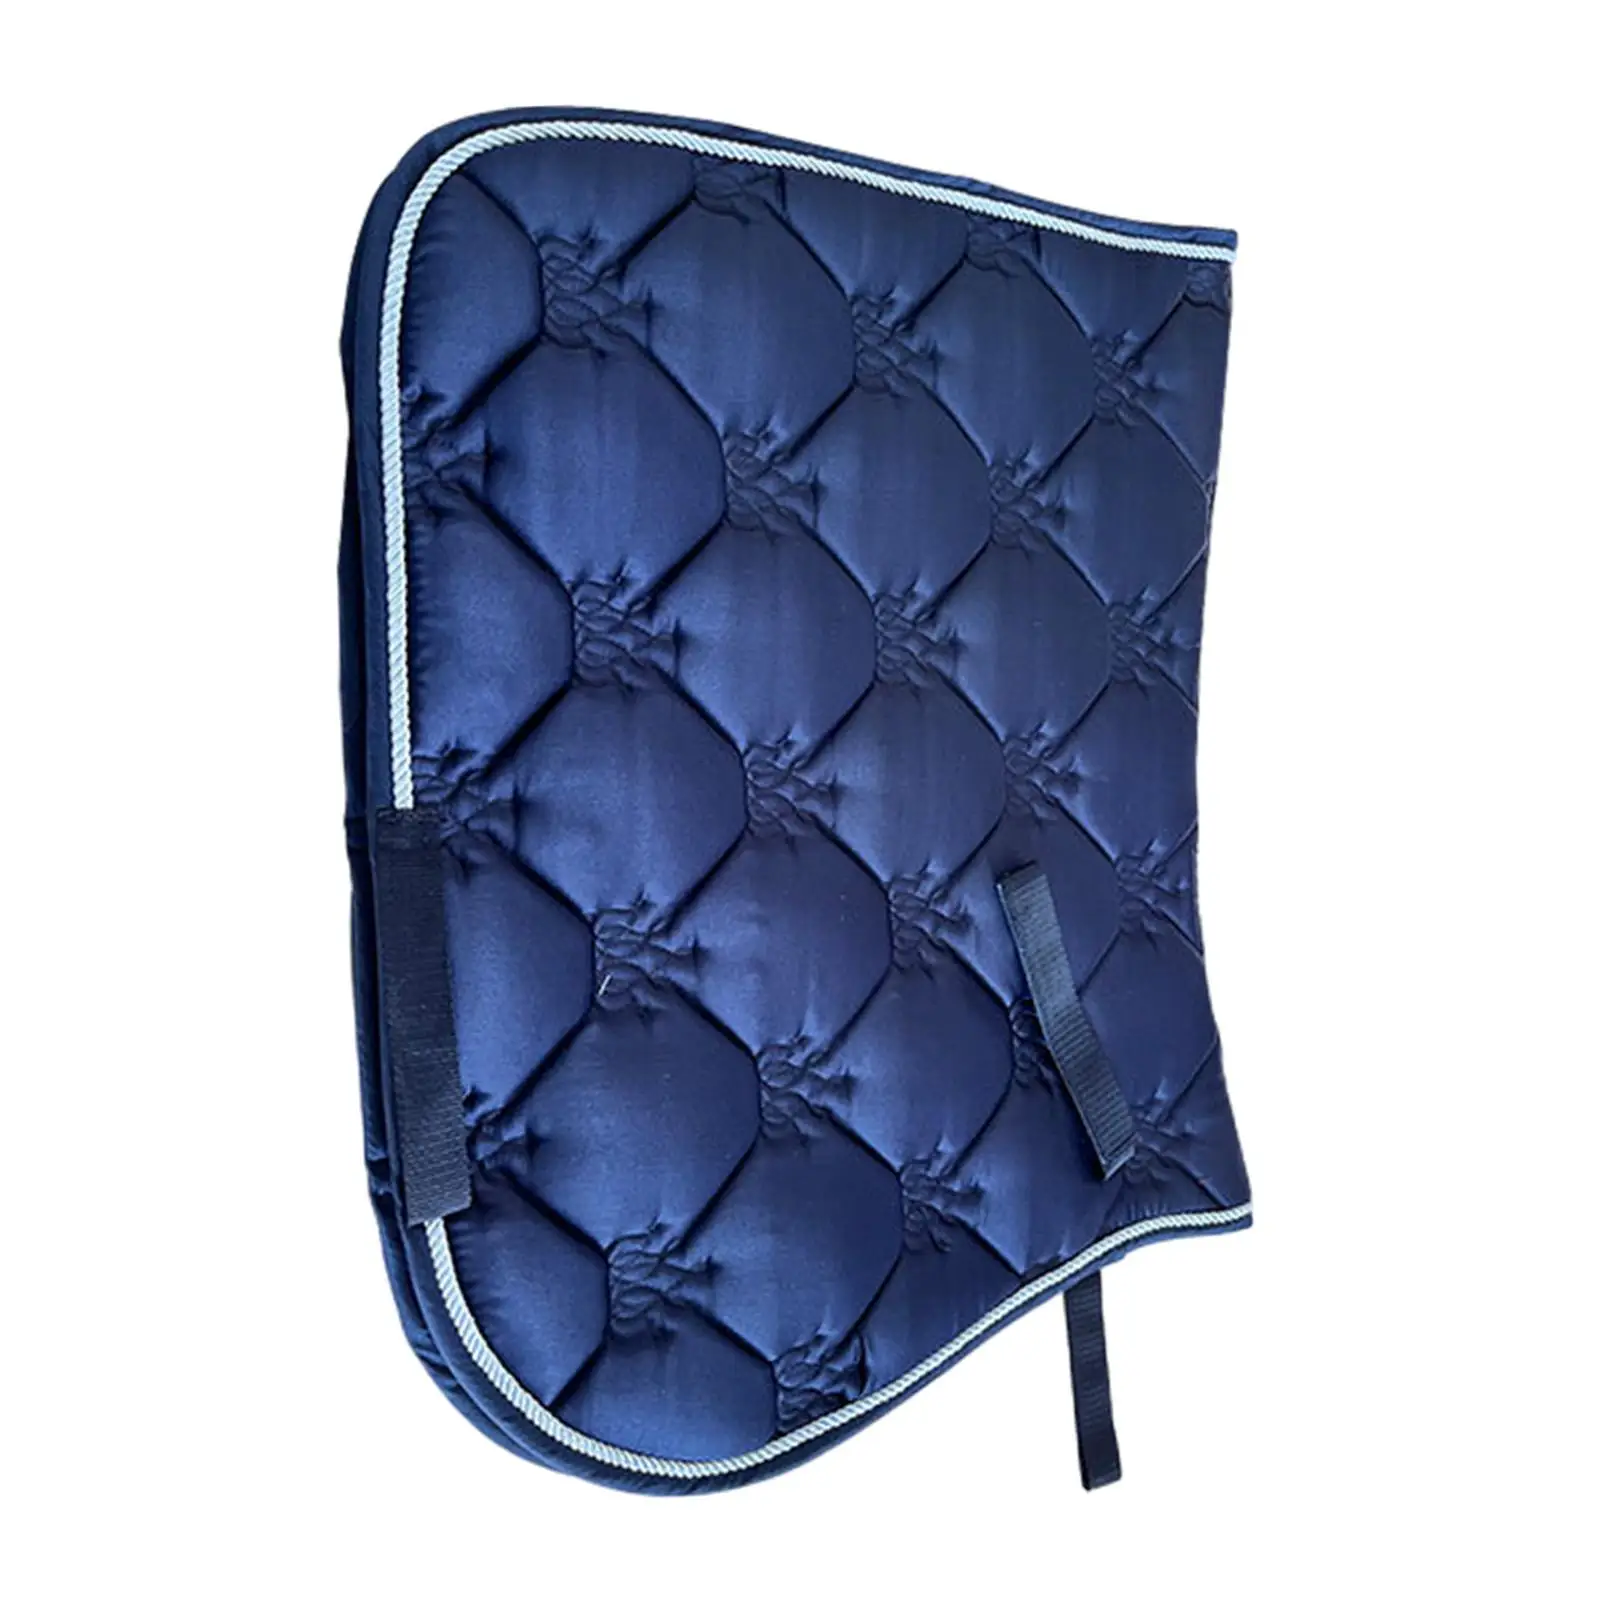 Saddle Pad Thickened Riding Sponge Lining Protector Non Slip Accessories Lightweight Durable Sports Seat Cushion Dressage Pad